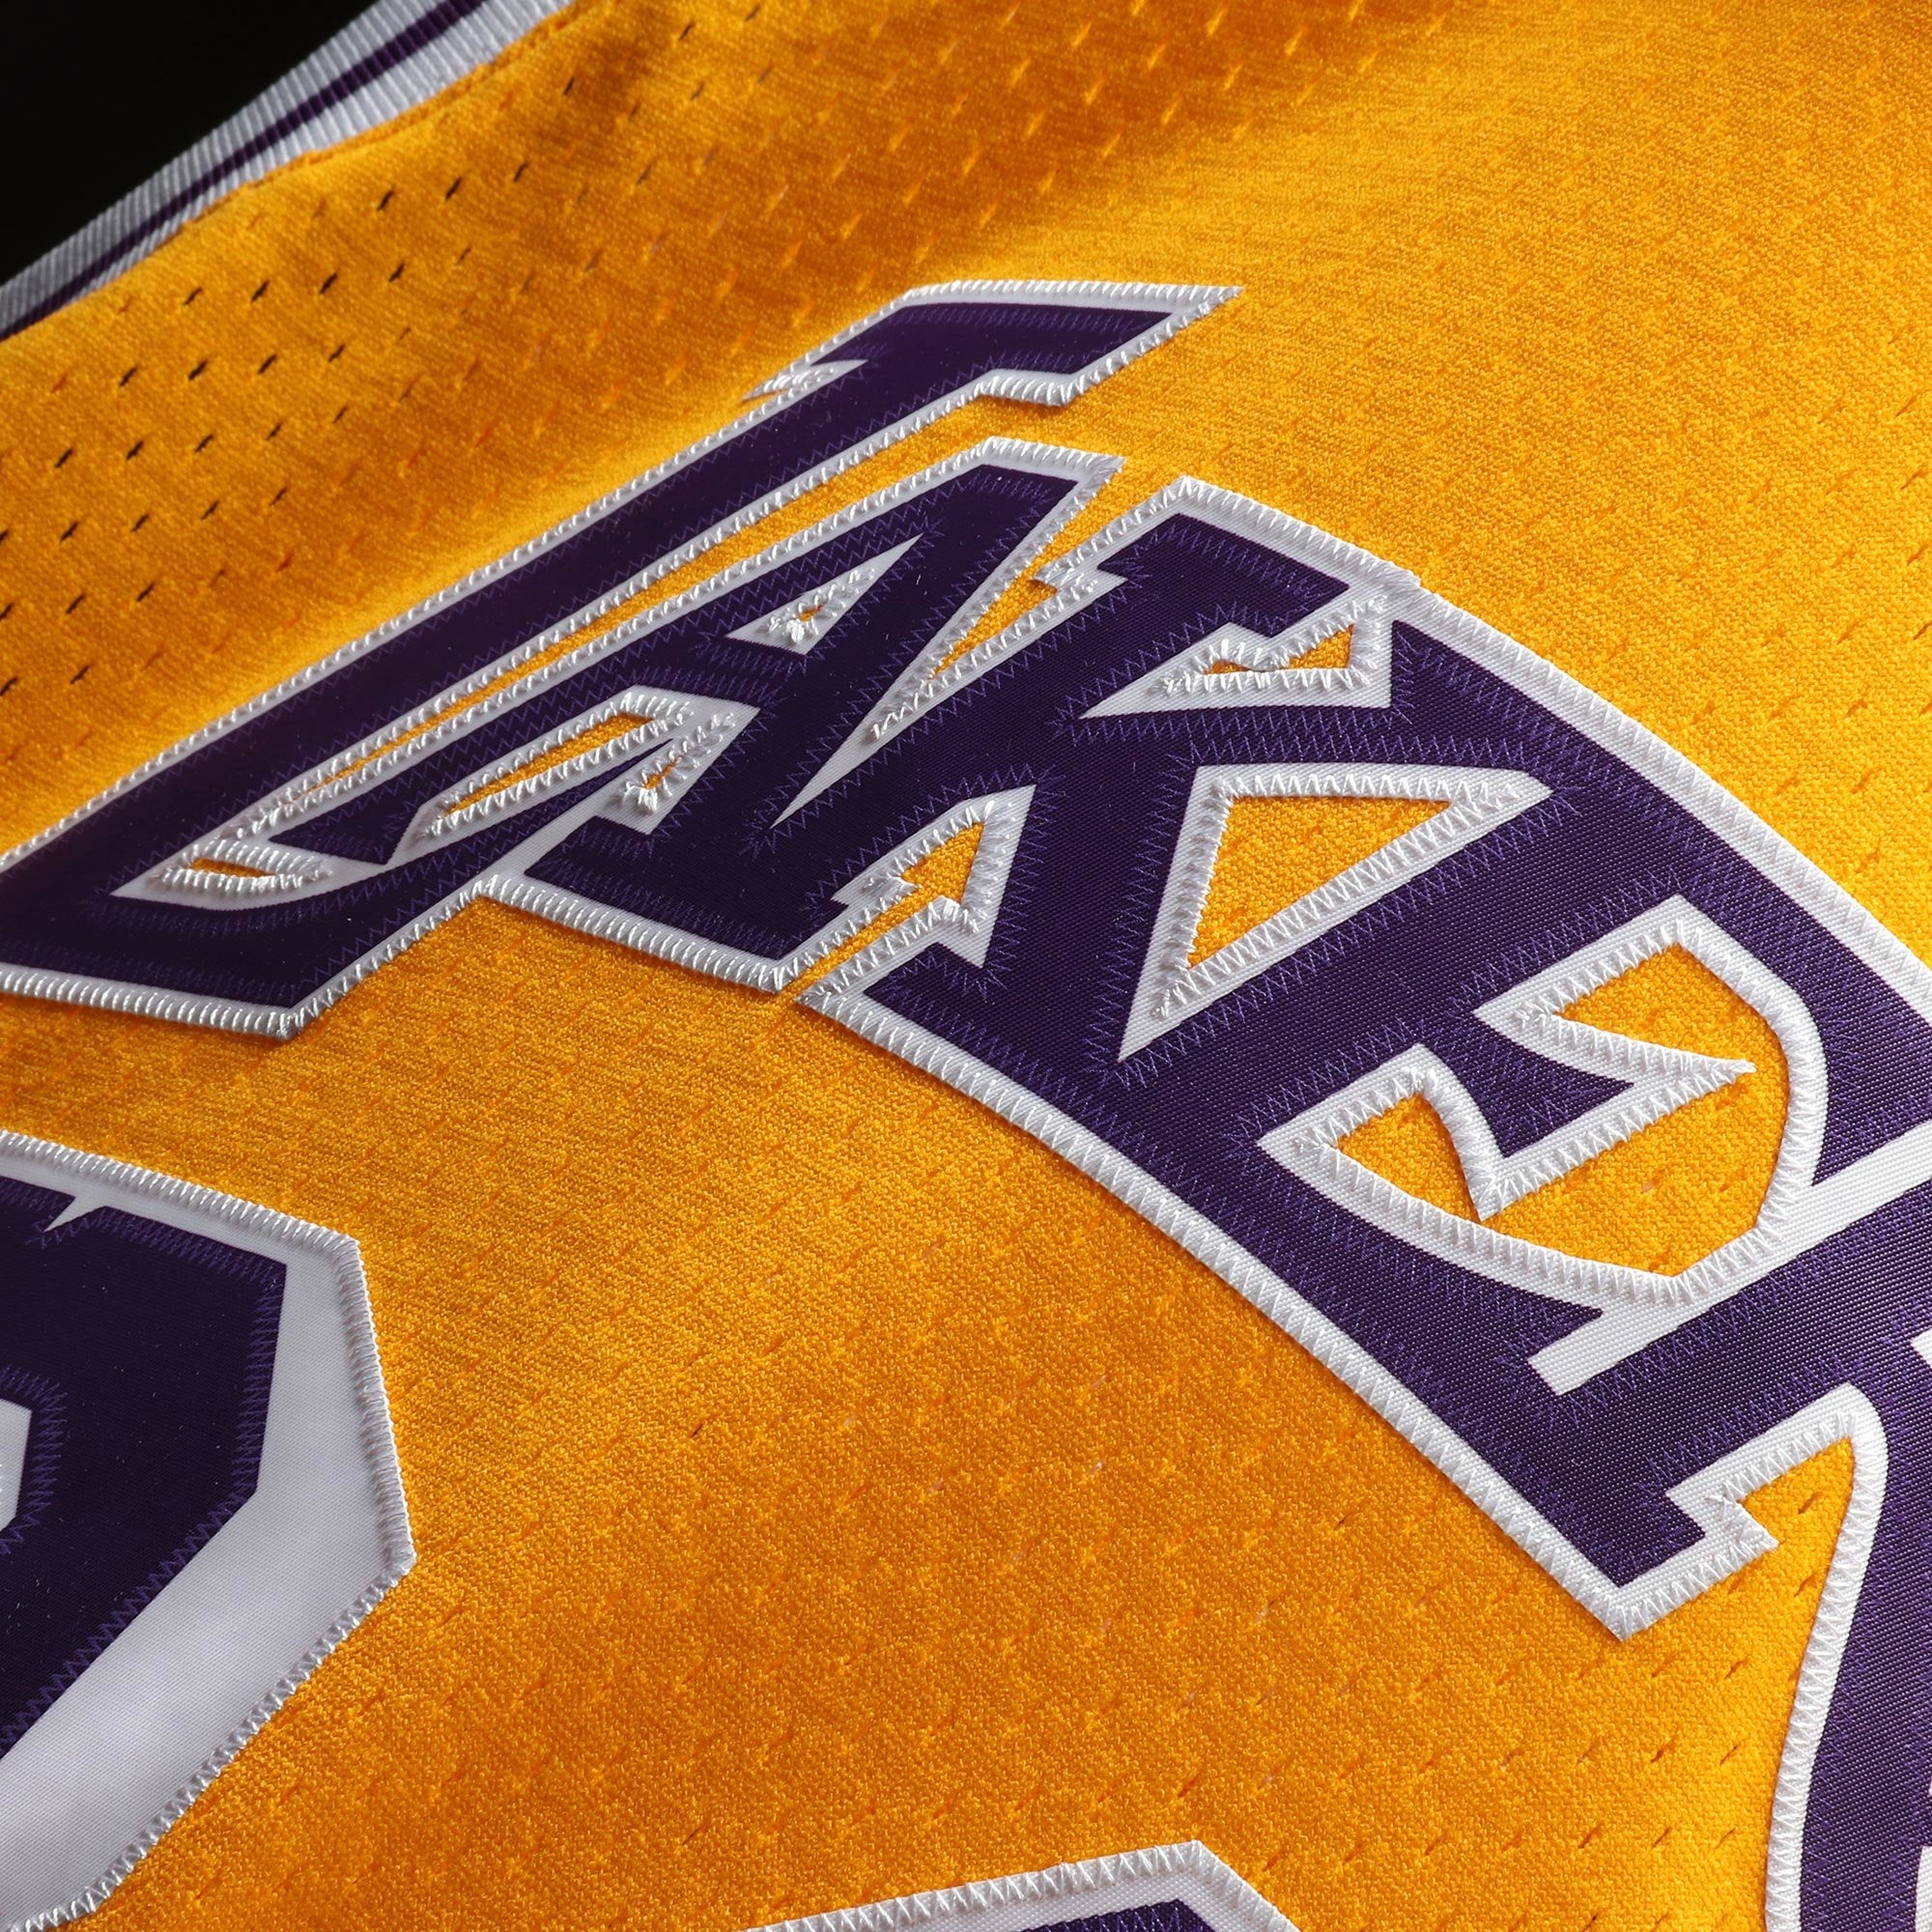 Mitchell & Ness Los Angeles Lakers Shaquille O'Neal #34 Galaxy Swingman Jersey Purple